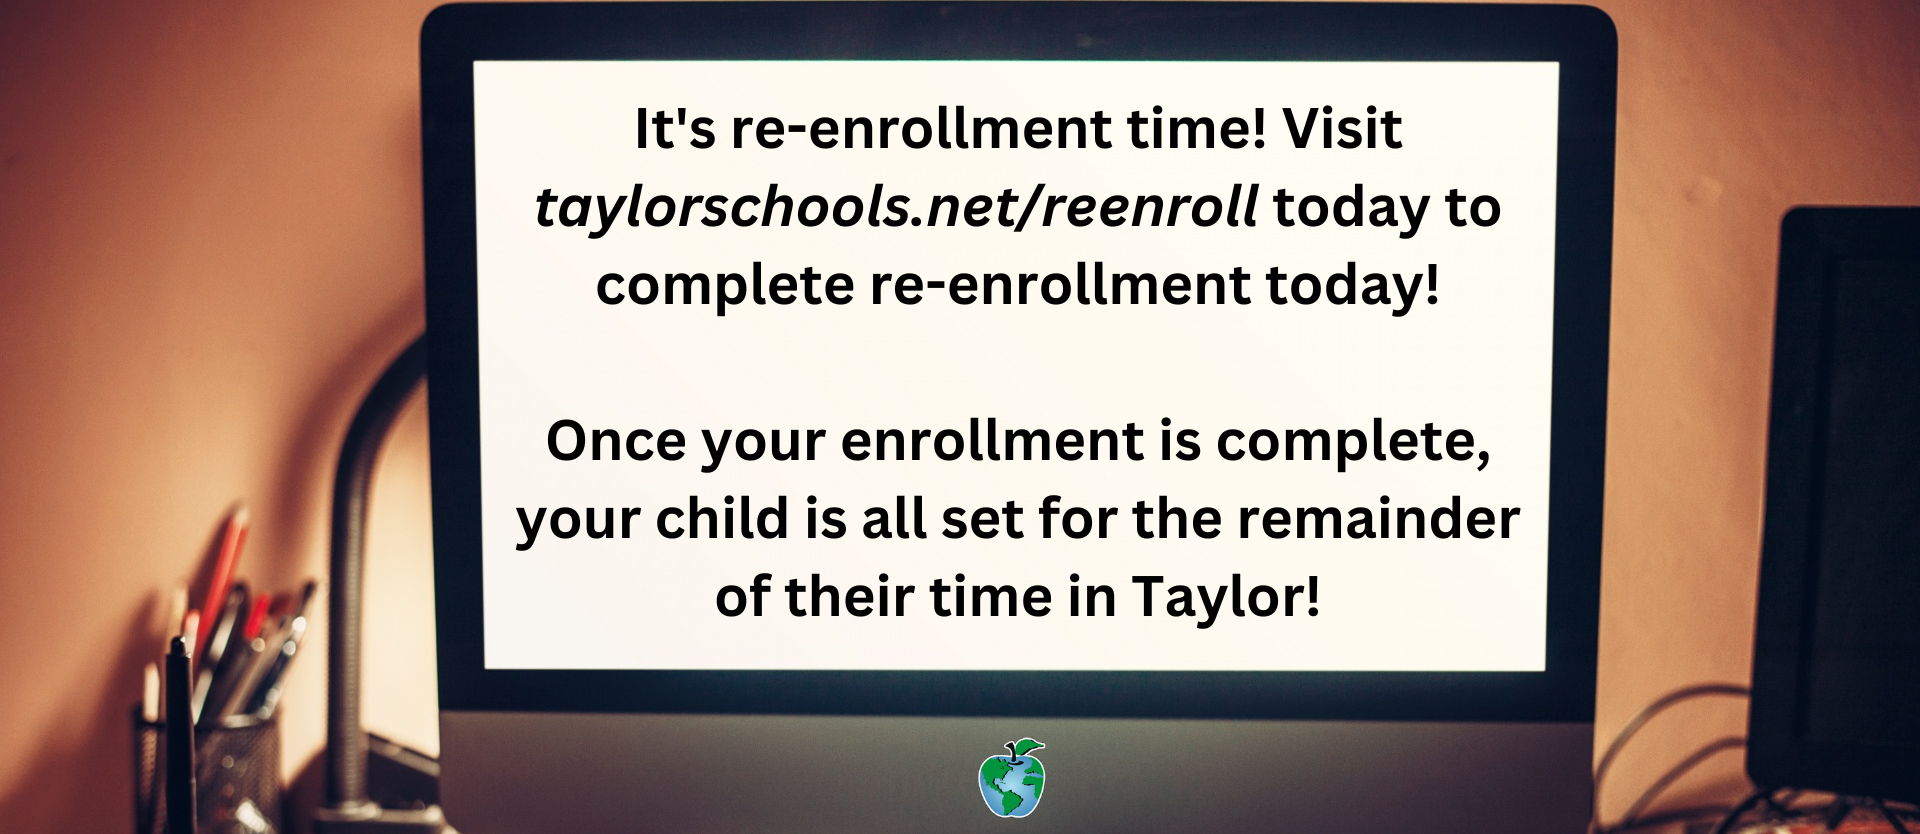 Re-enroll Your Student Today